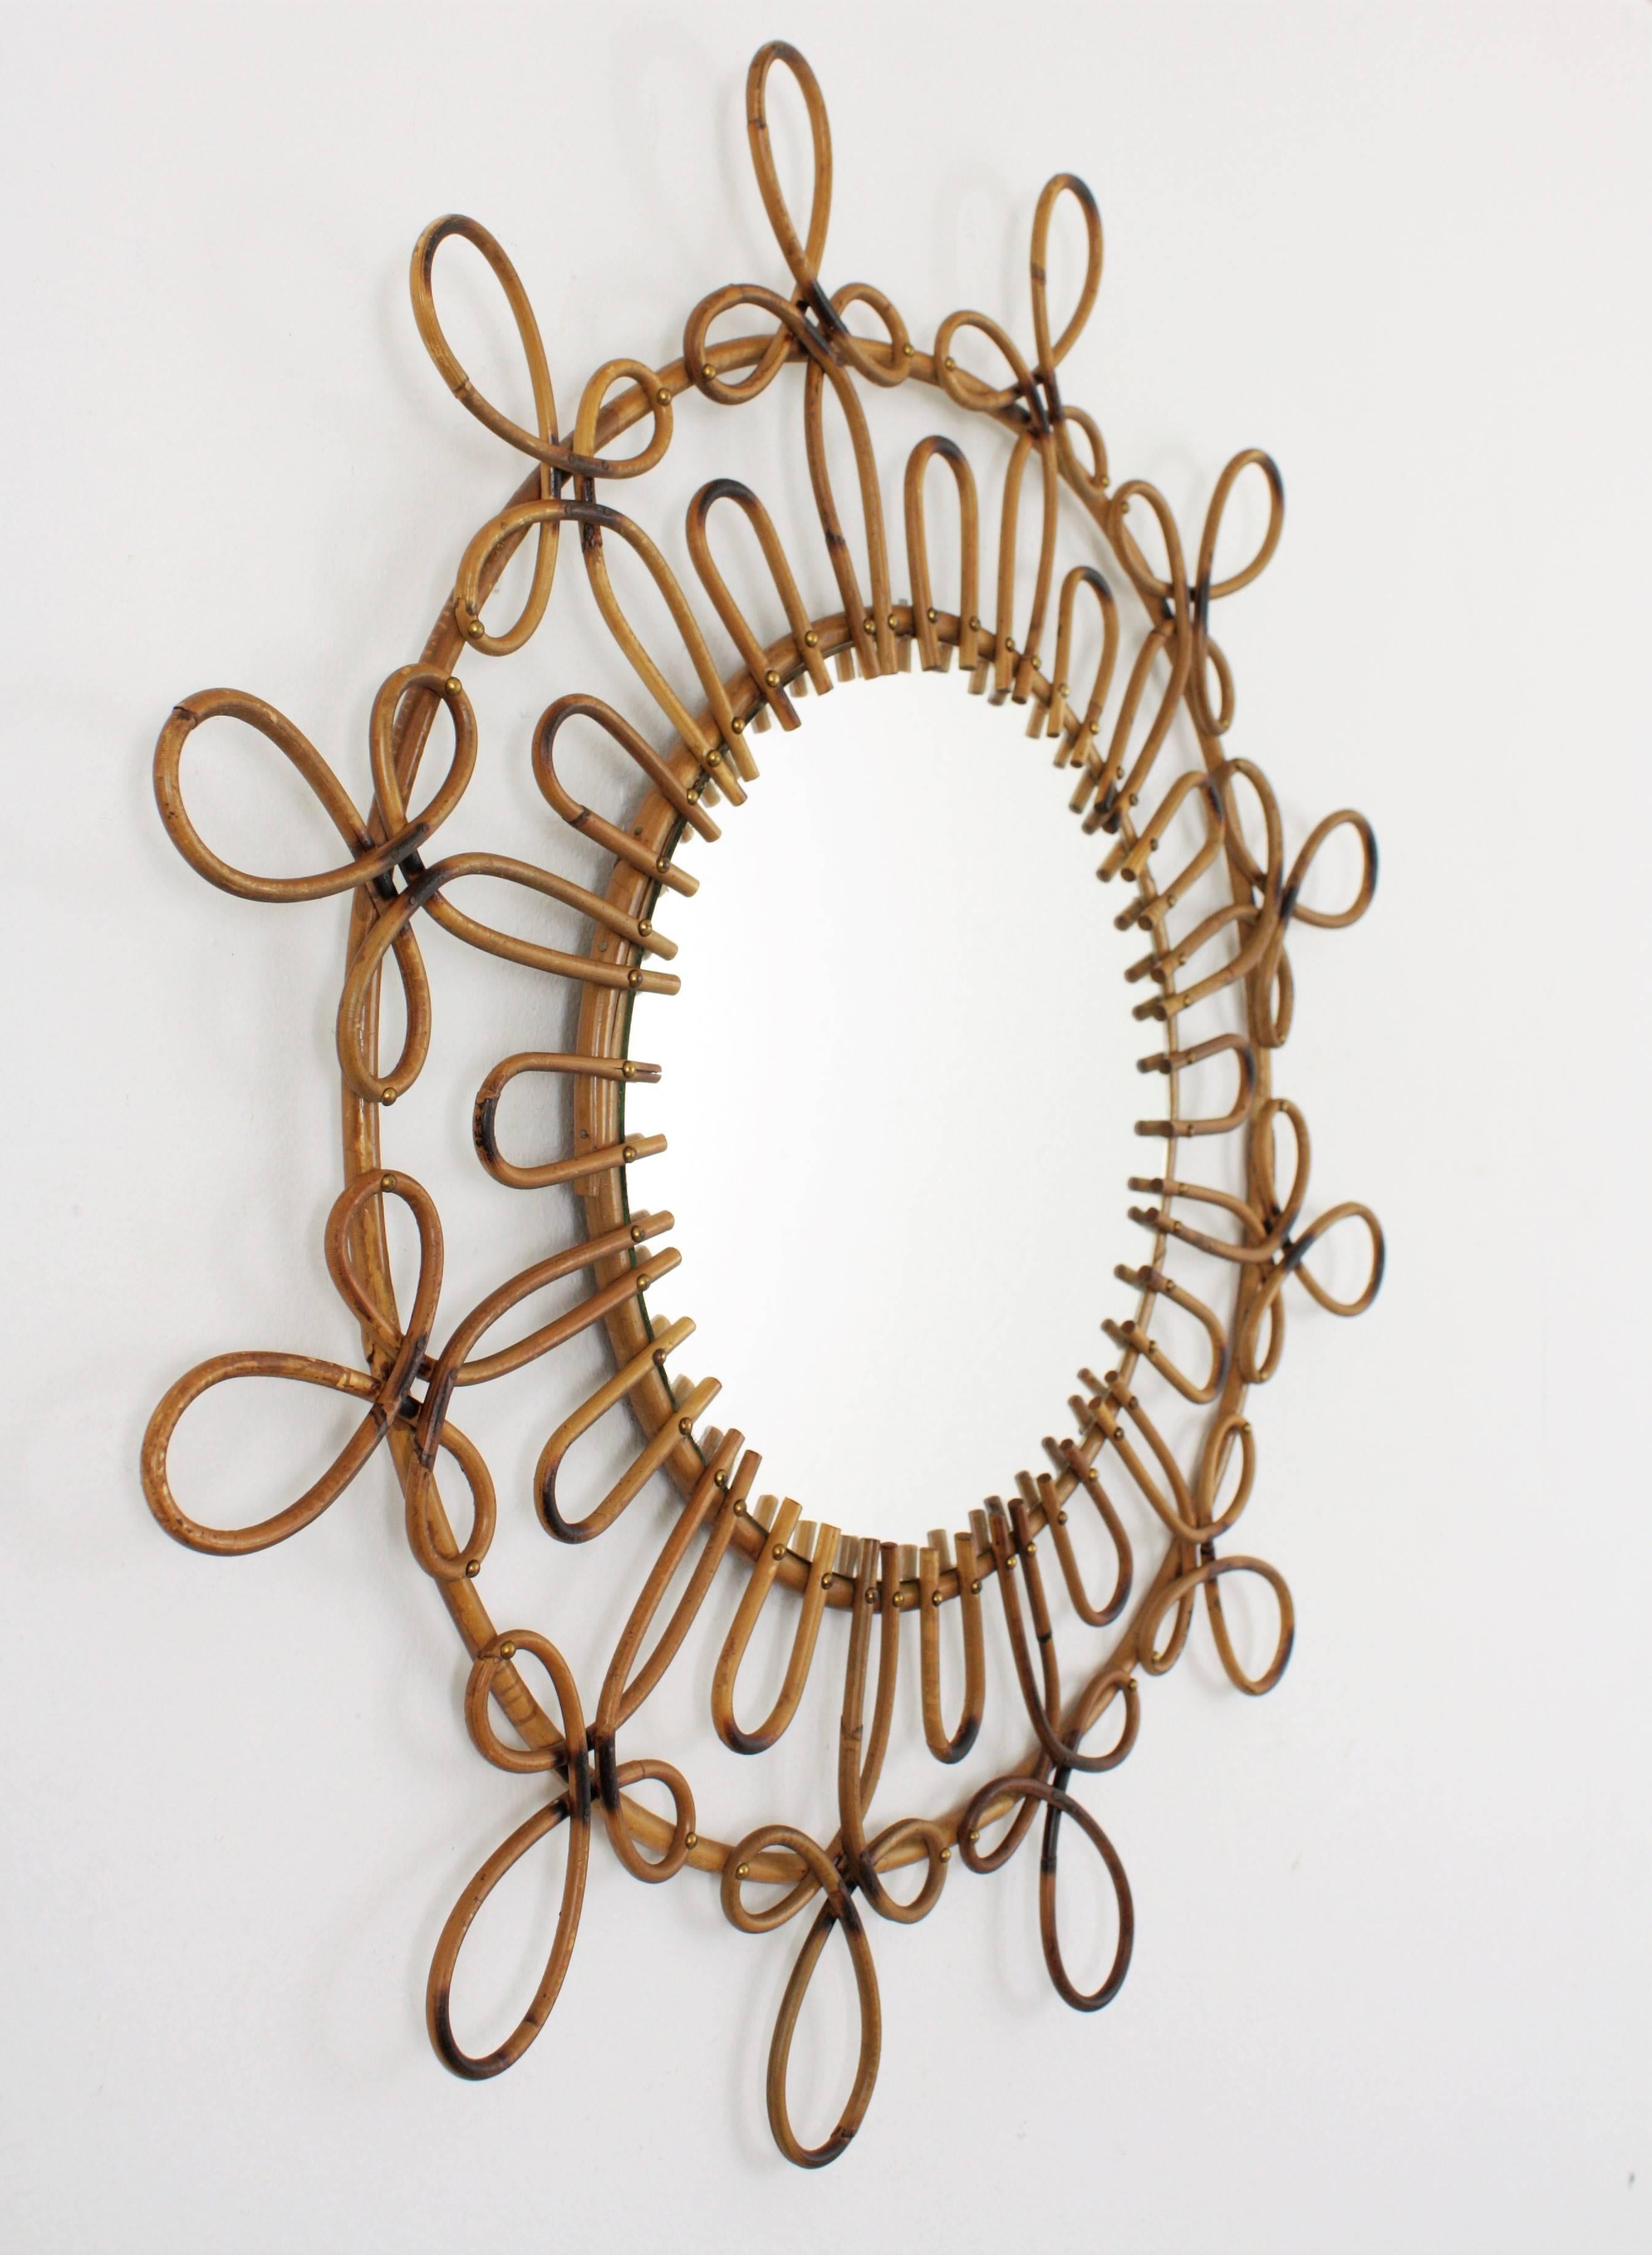 Hand-Crafted Spanish Rattan and Wicker Flower Burst Mirror with Loops and Pyrography Details